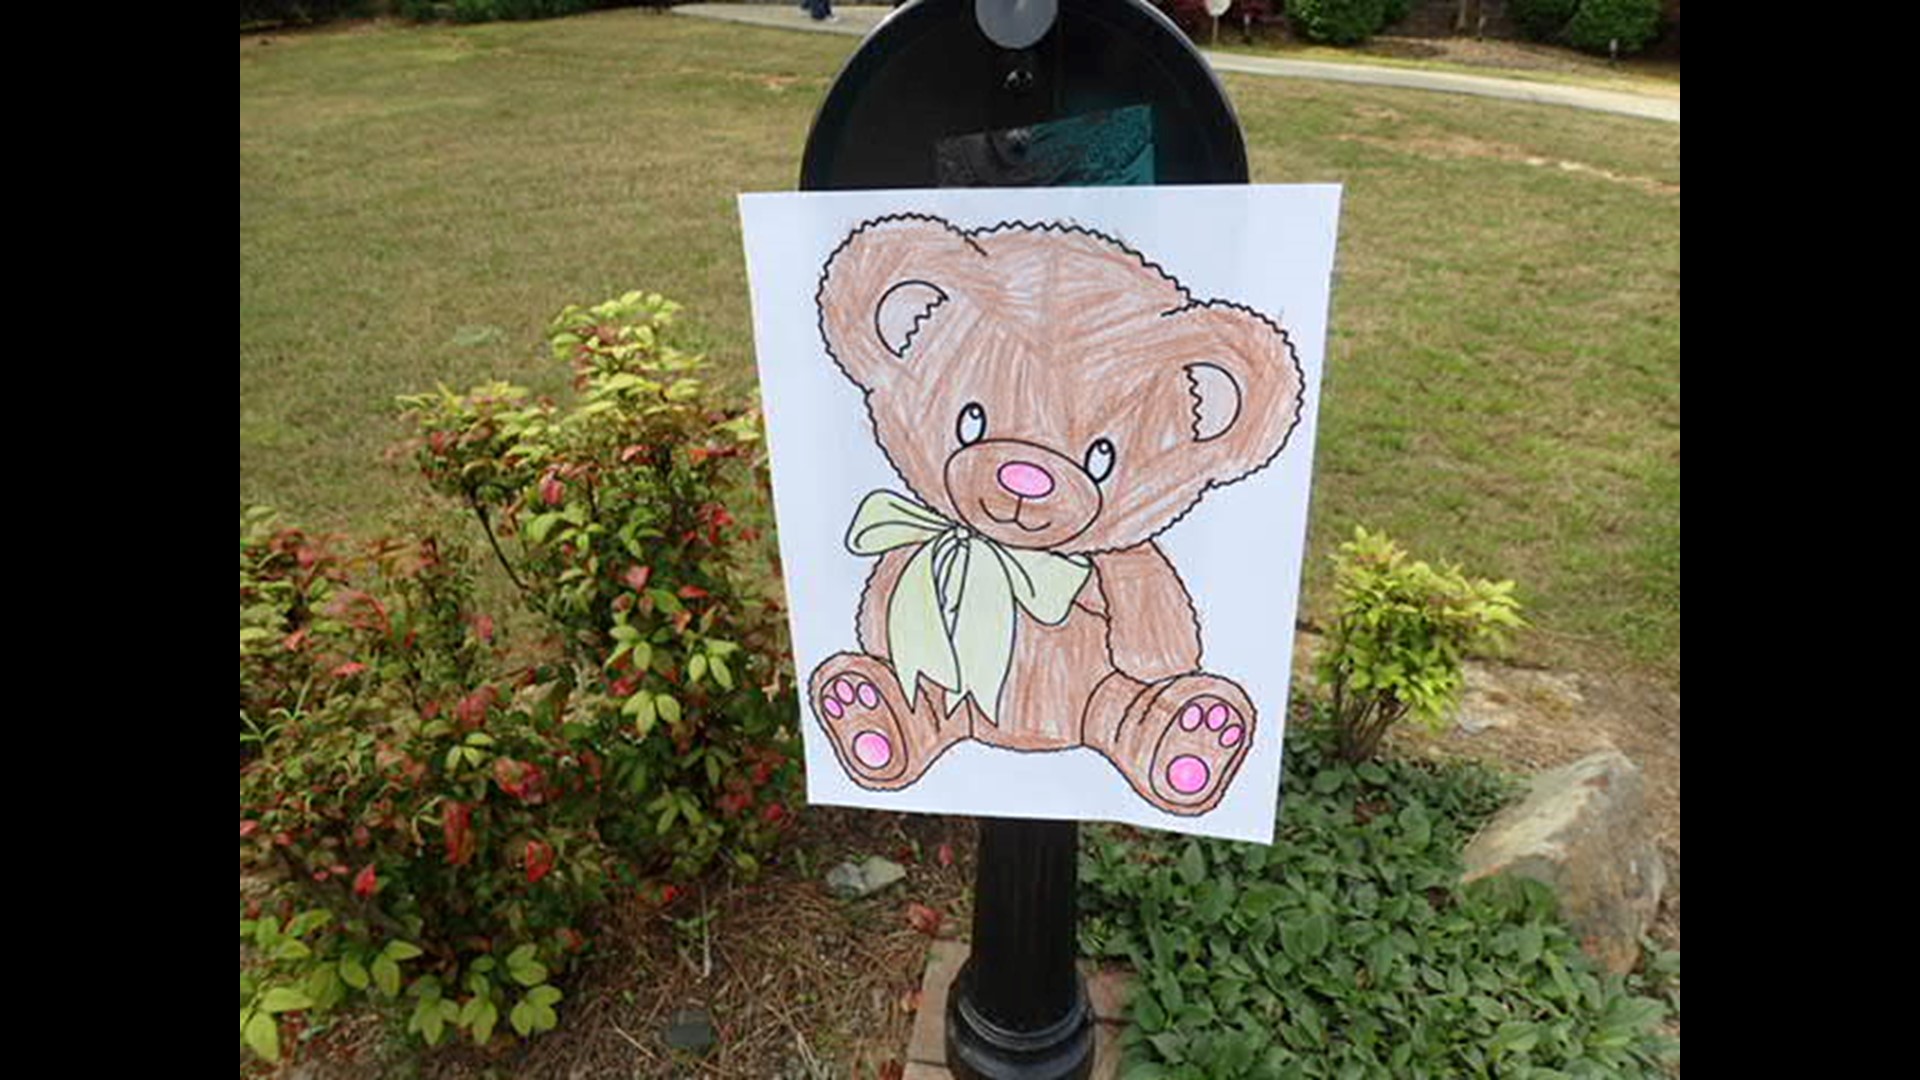 Henry Rentz didn't expect a bear scavenger hunt after his original birthday party got cancelled because of COVID-19.